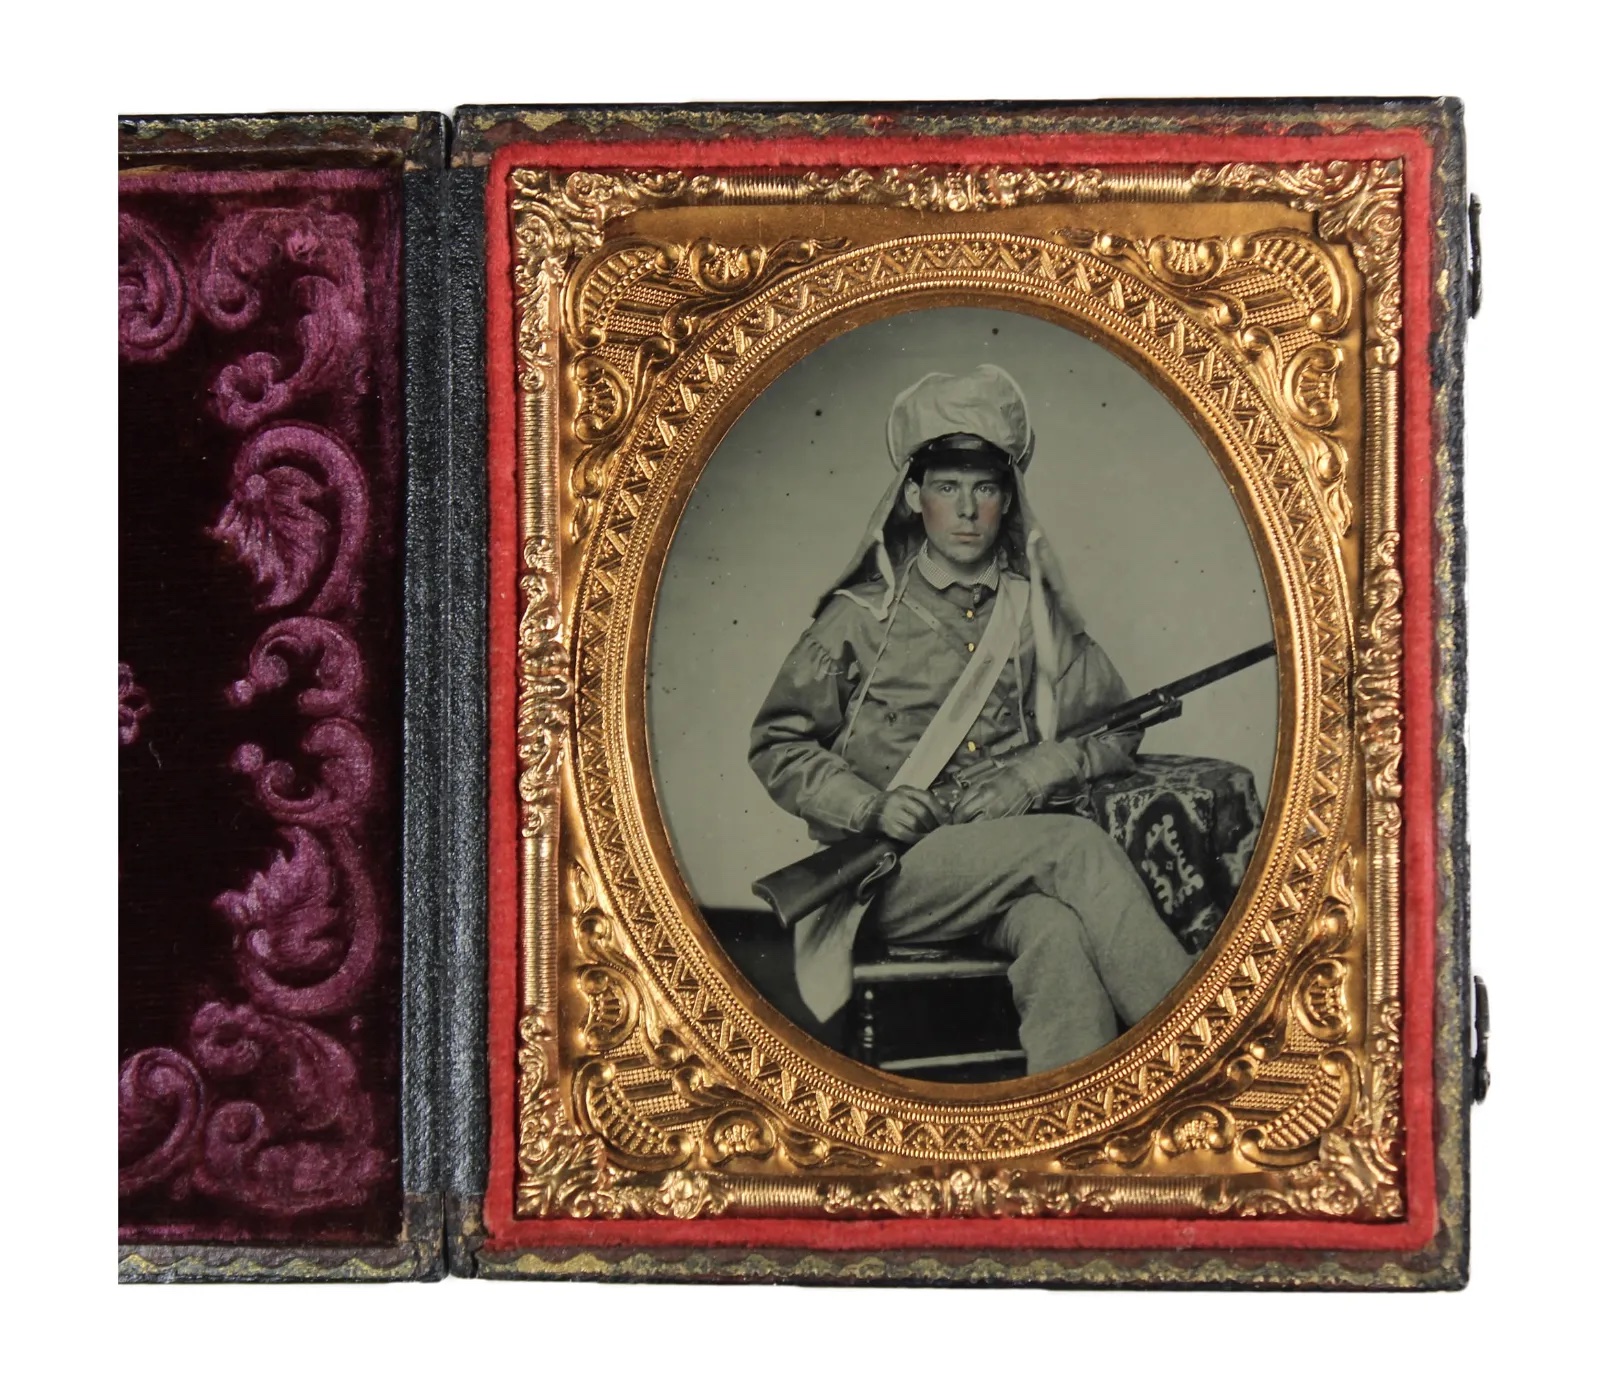 Circa-1862 ambrotype of a Confederate soldier holding a Colt M1855 revolving rifle, which sold for $26,500 ($32,595 with buyer’s premium) at Fleischer's.
